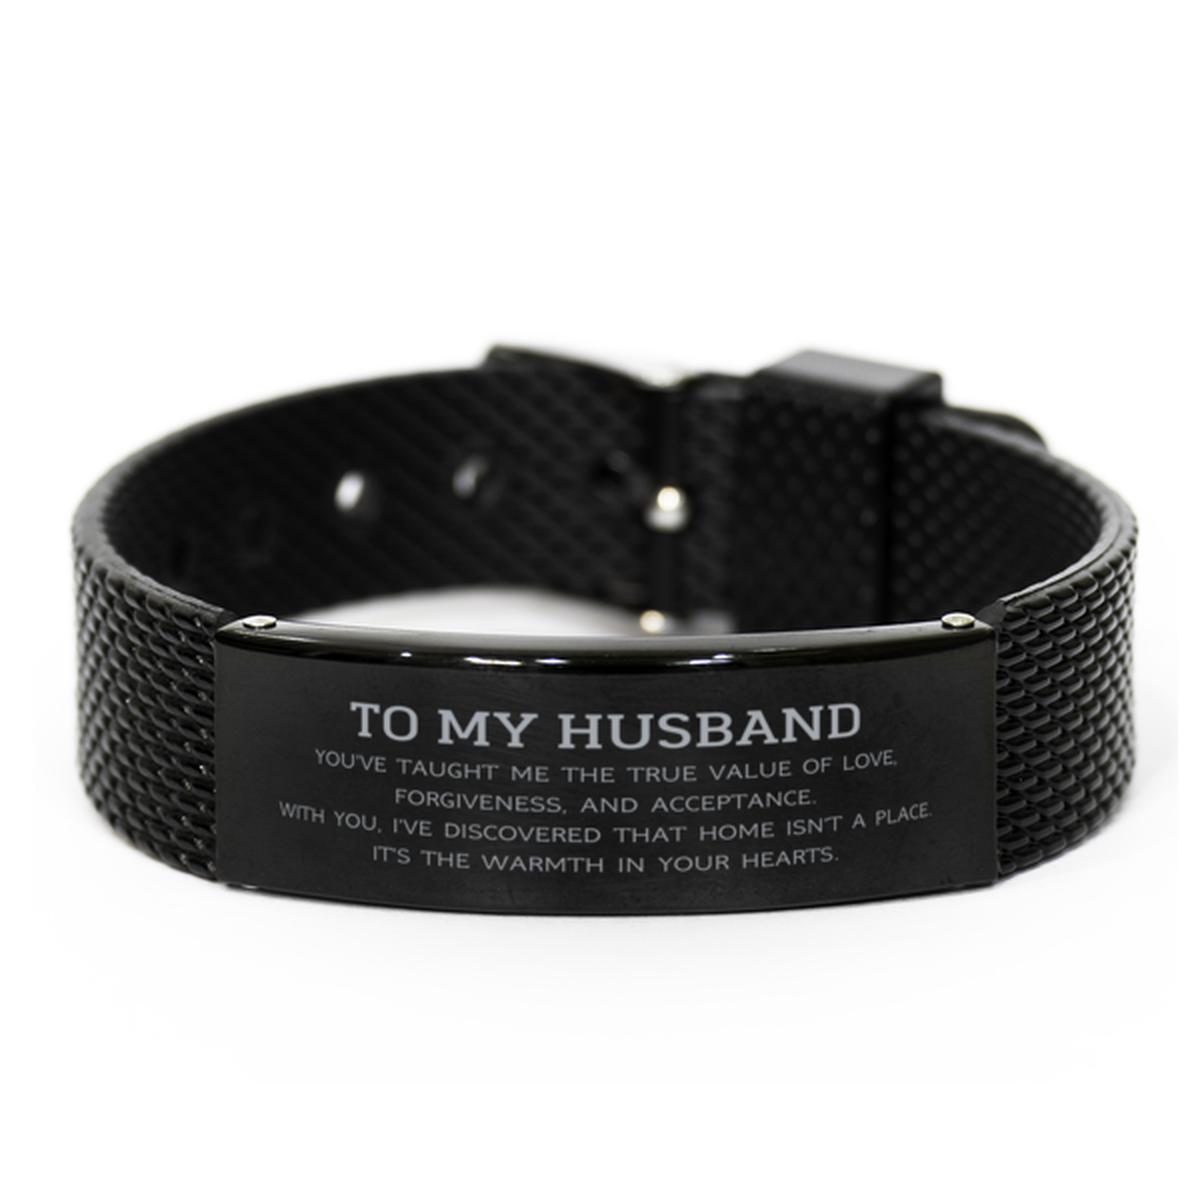 To My Husband Gifts, You've taught me the true value of love, Thank You Gifts For Husband, Birthday Black Shark Mesh Bracelet For Husband